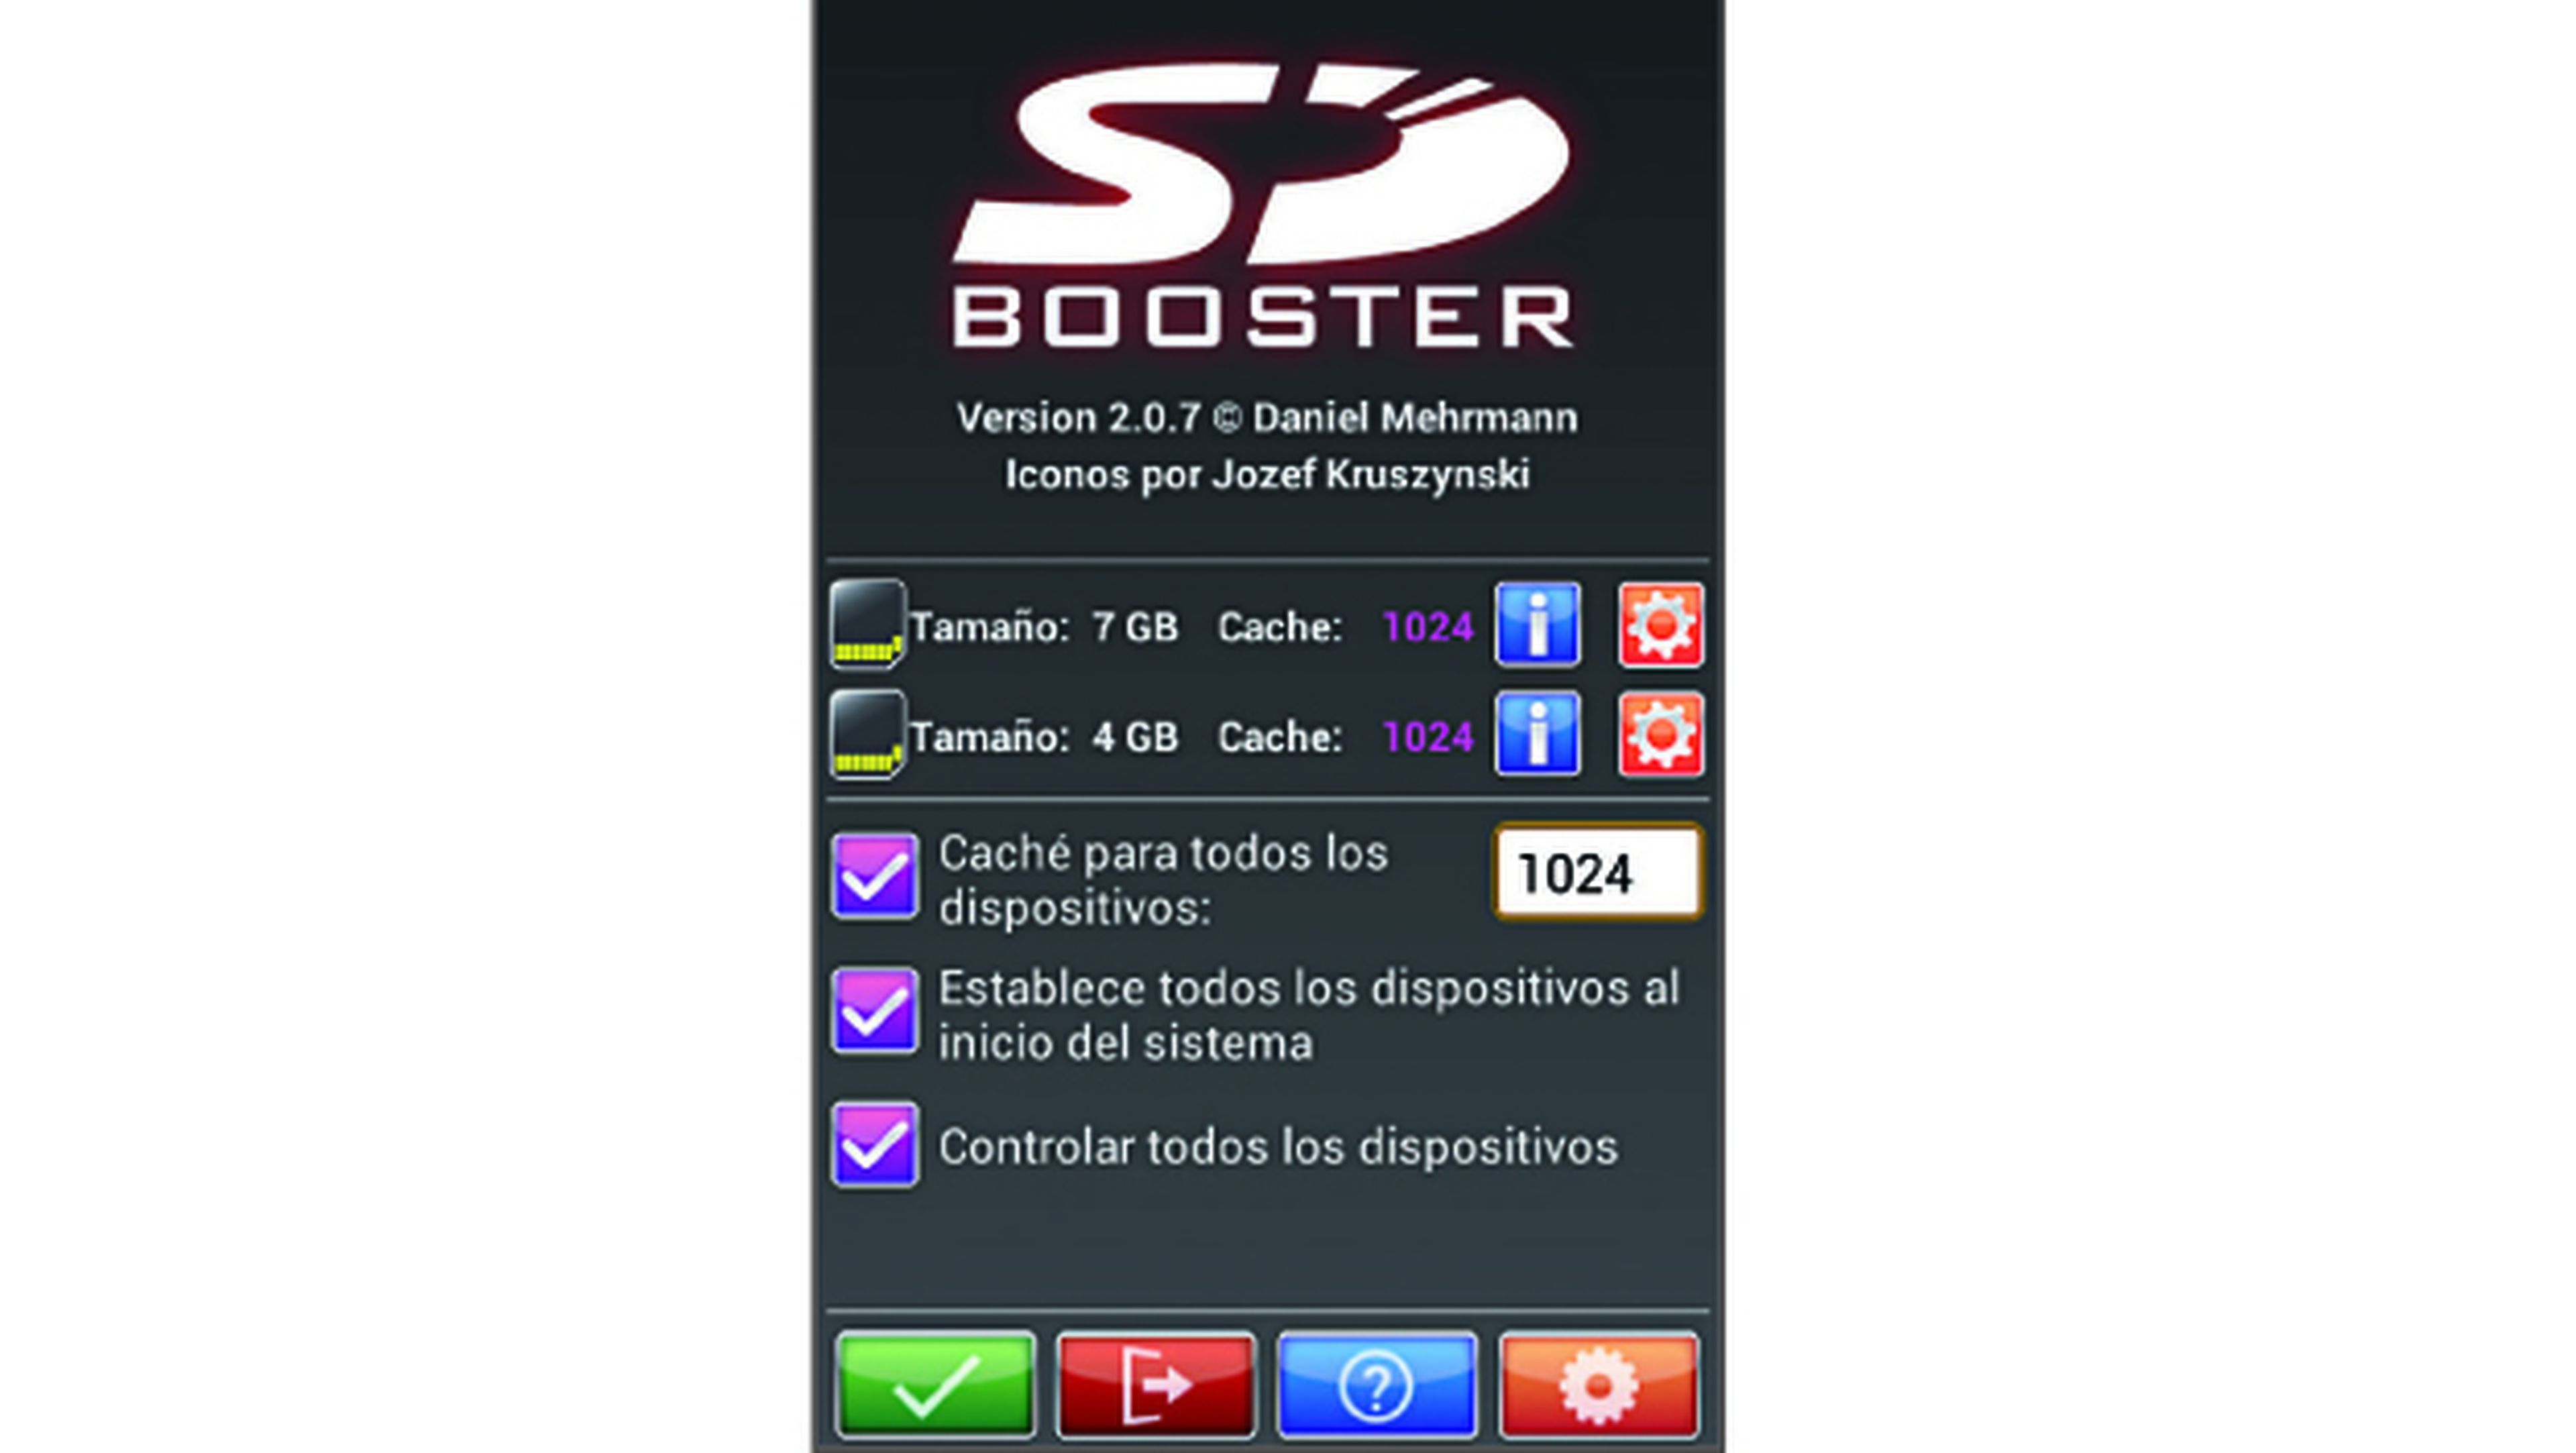 sd booster